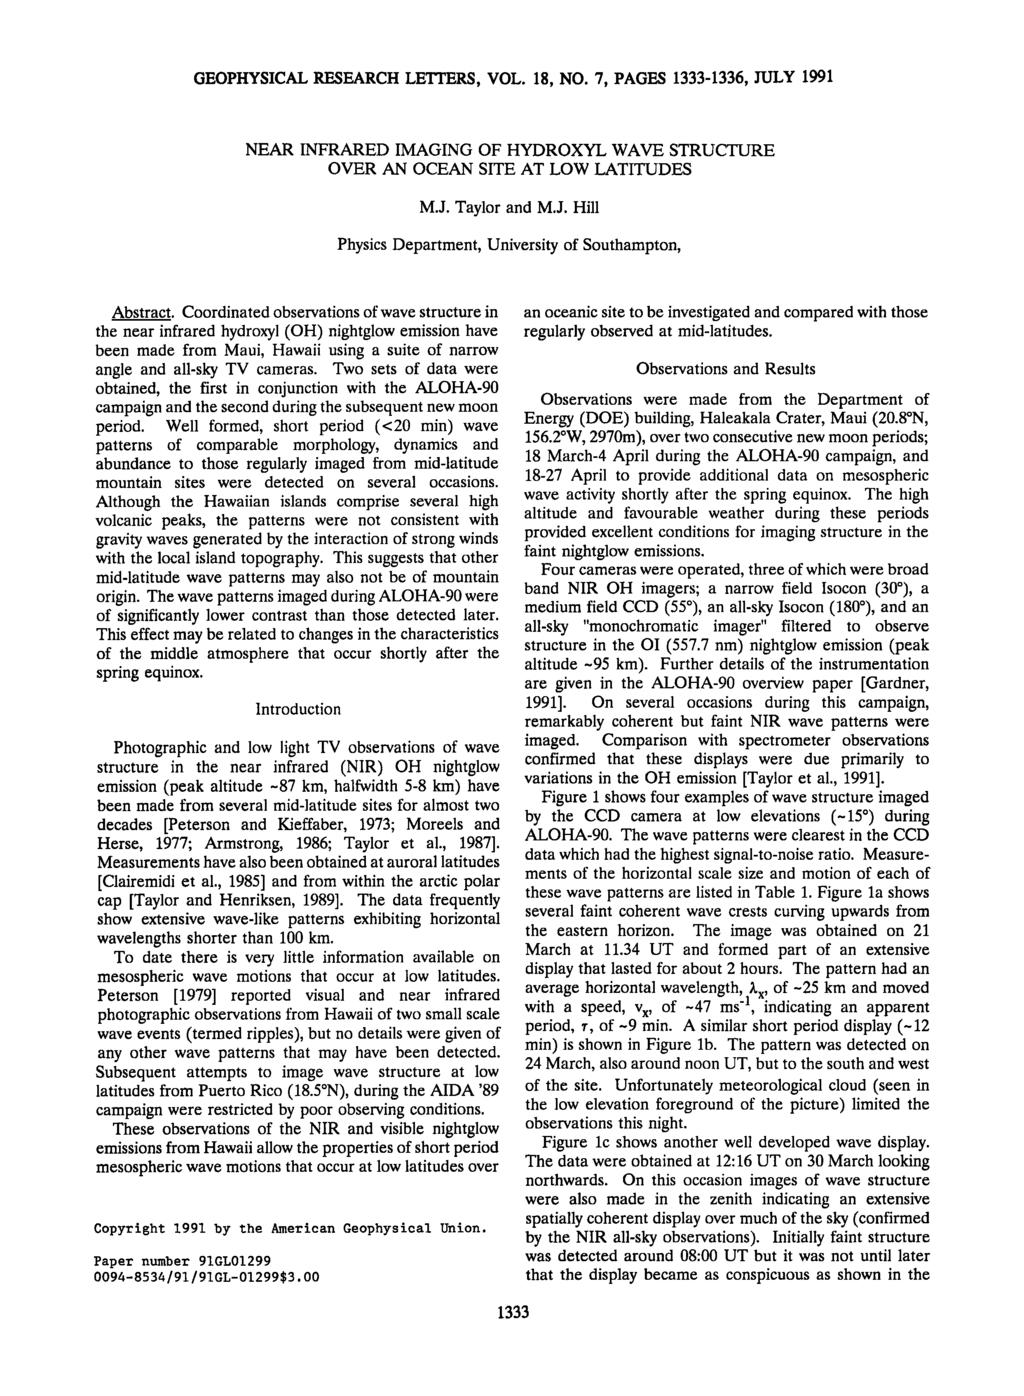 GEOPHYSICAL RESEARCH LETTERS, VOL. 18, NO. 7, PAGES 1333-1336, JULY 1991 NEAR INFRARED IMAGING OF HYDROXYL WAVE STRUCTURE OVER AN OCEAN SITE AT LOW LATITUDES M.J. Taylor and M.J. Hill Physics Department, University of Southampton, Abstract.